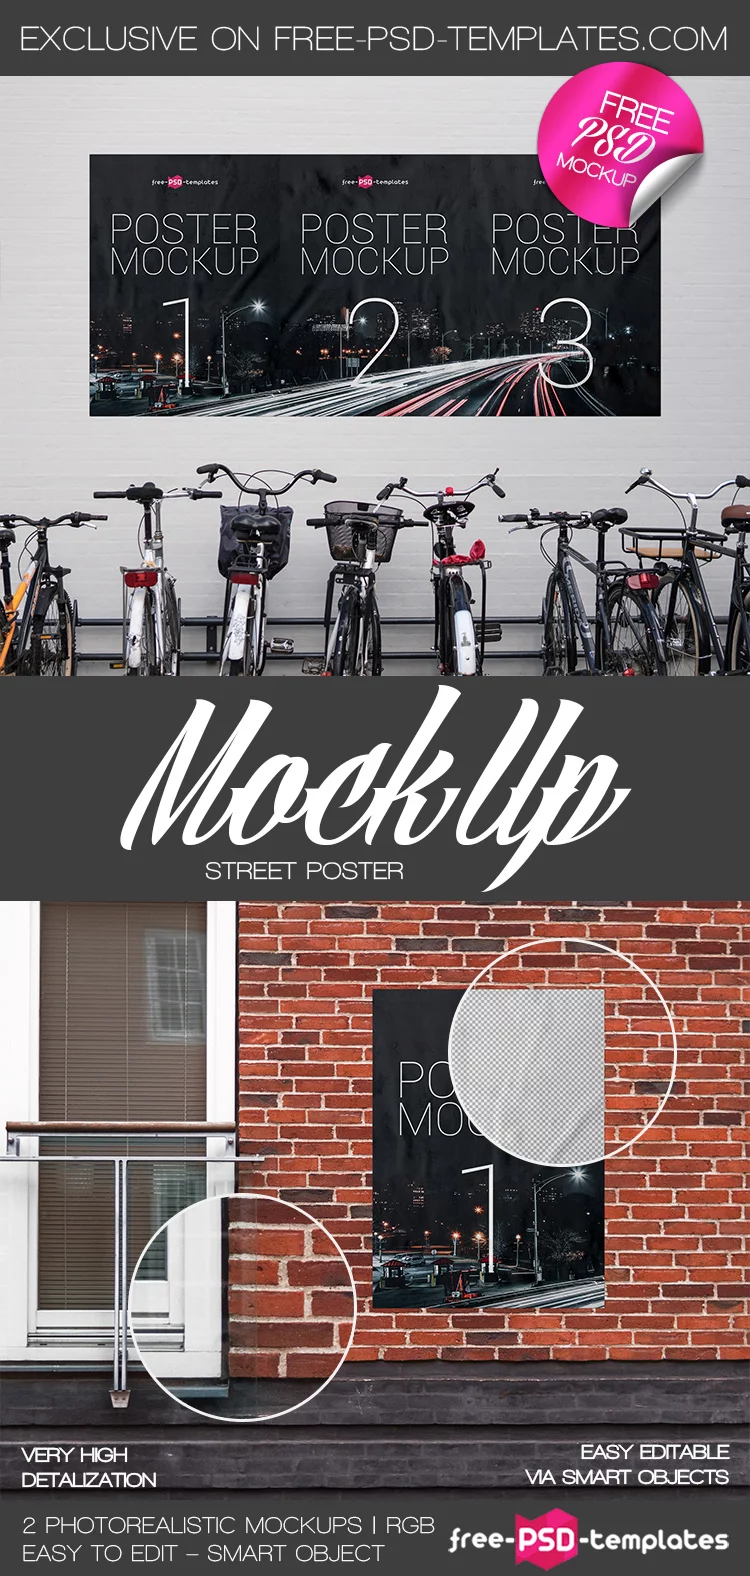 2 Free Street Poster Mock-ups in PSD